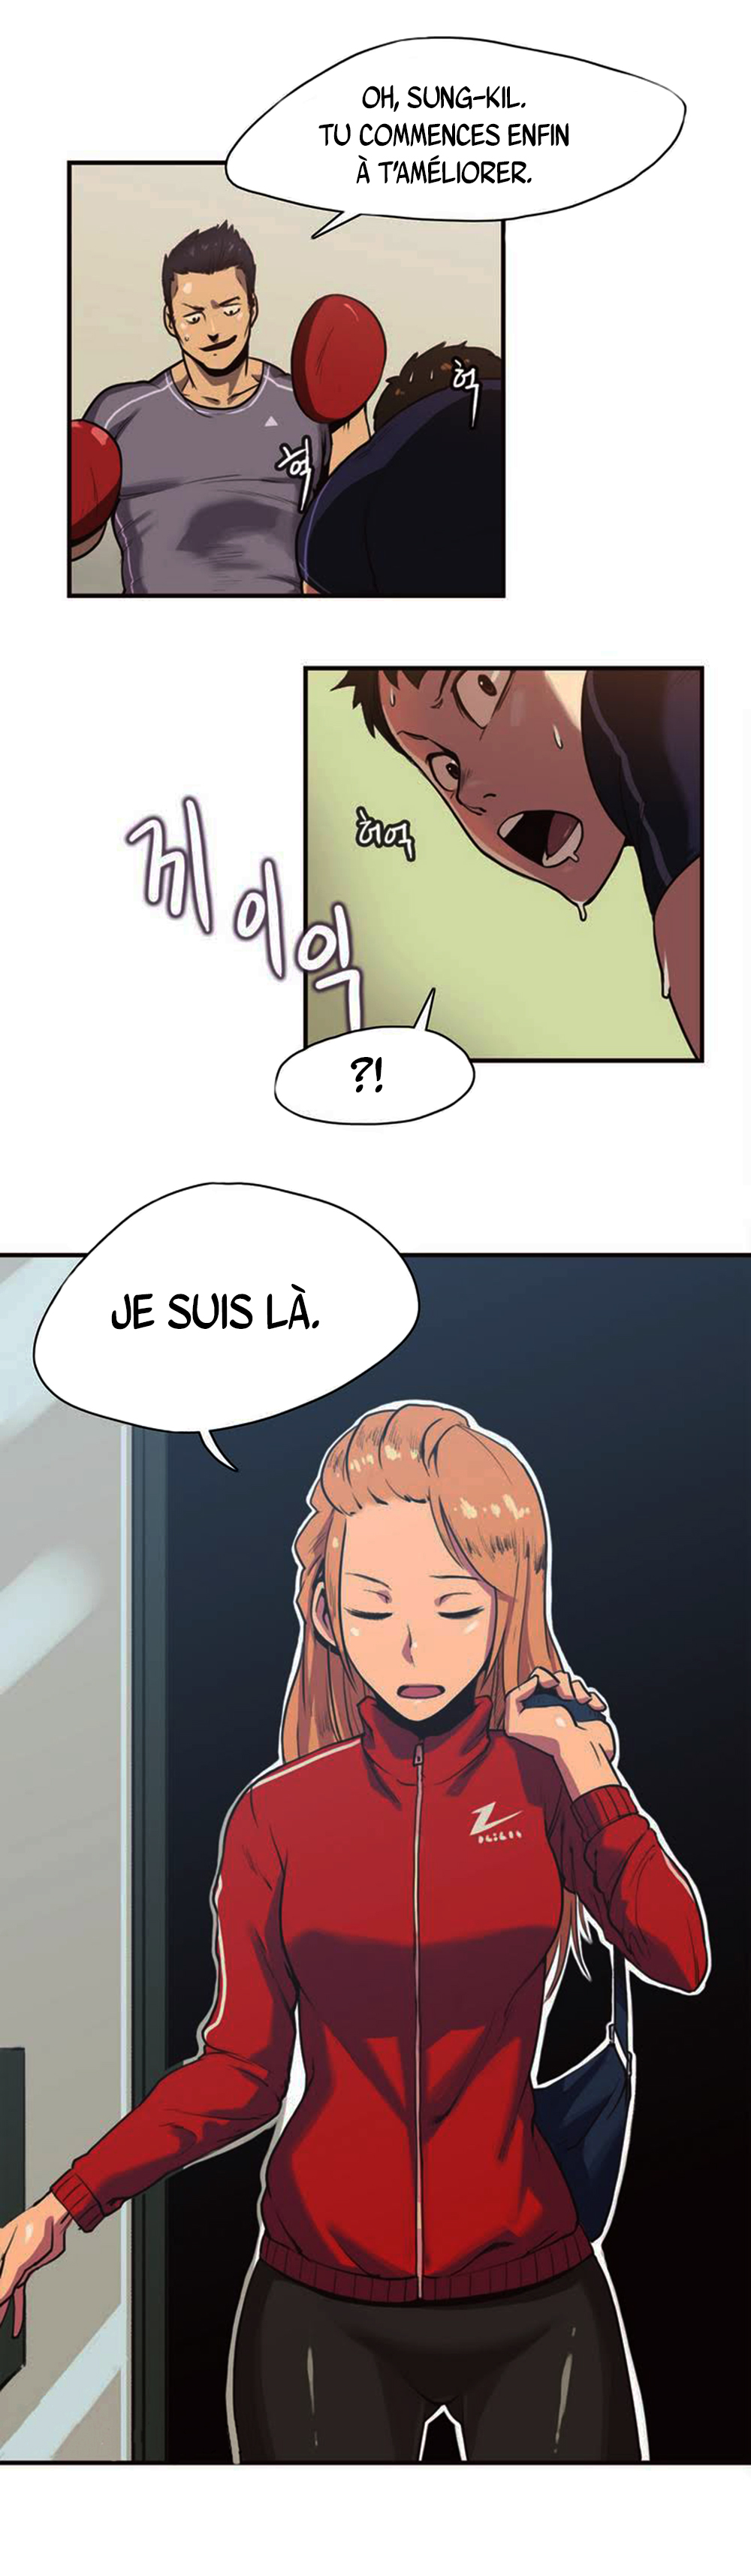 [Gamang] Sports Girl Ch.1-3 [French][O-S] 